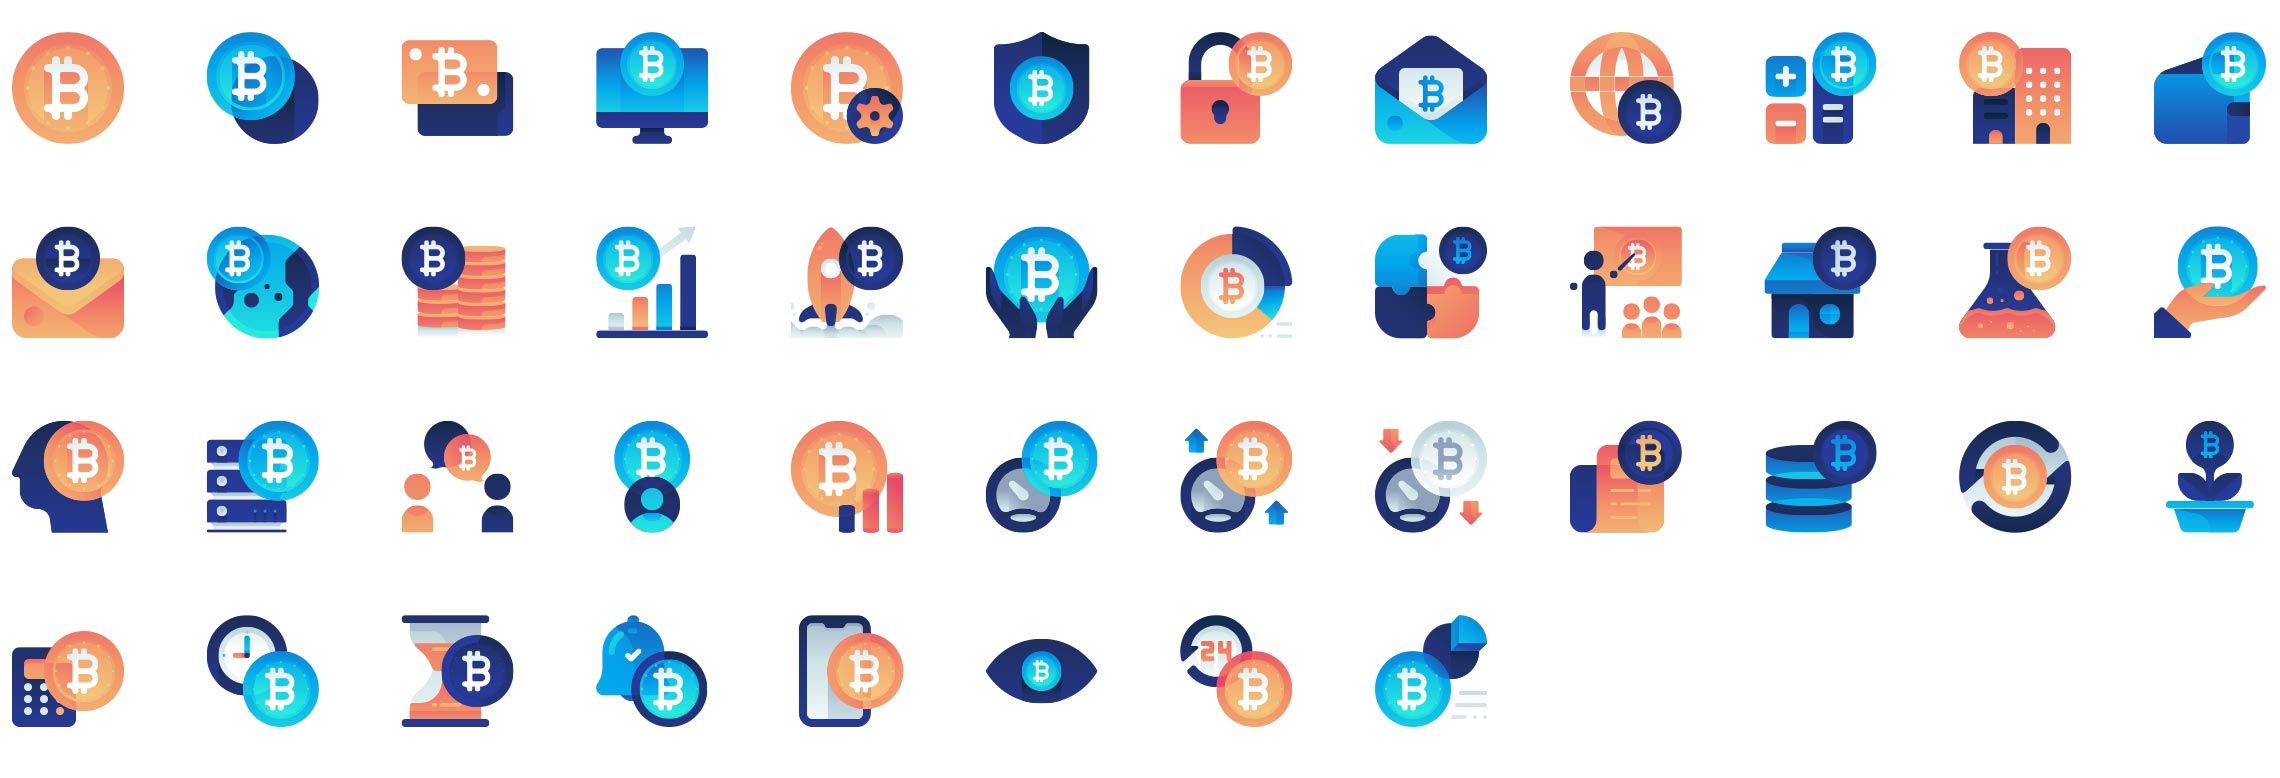 bitcoin-gradient-icons-preview